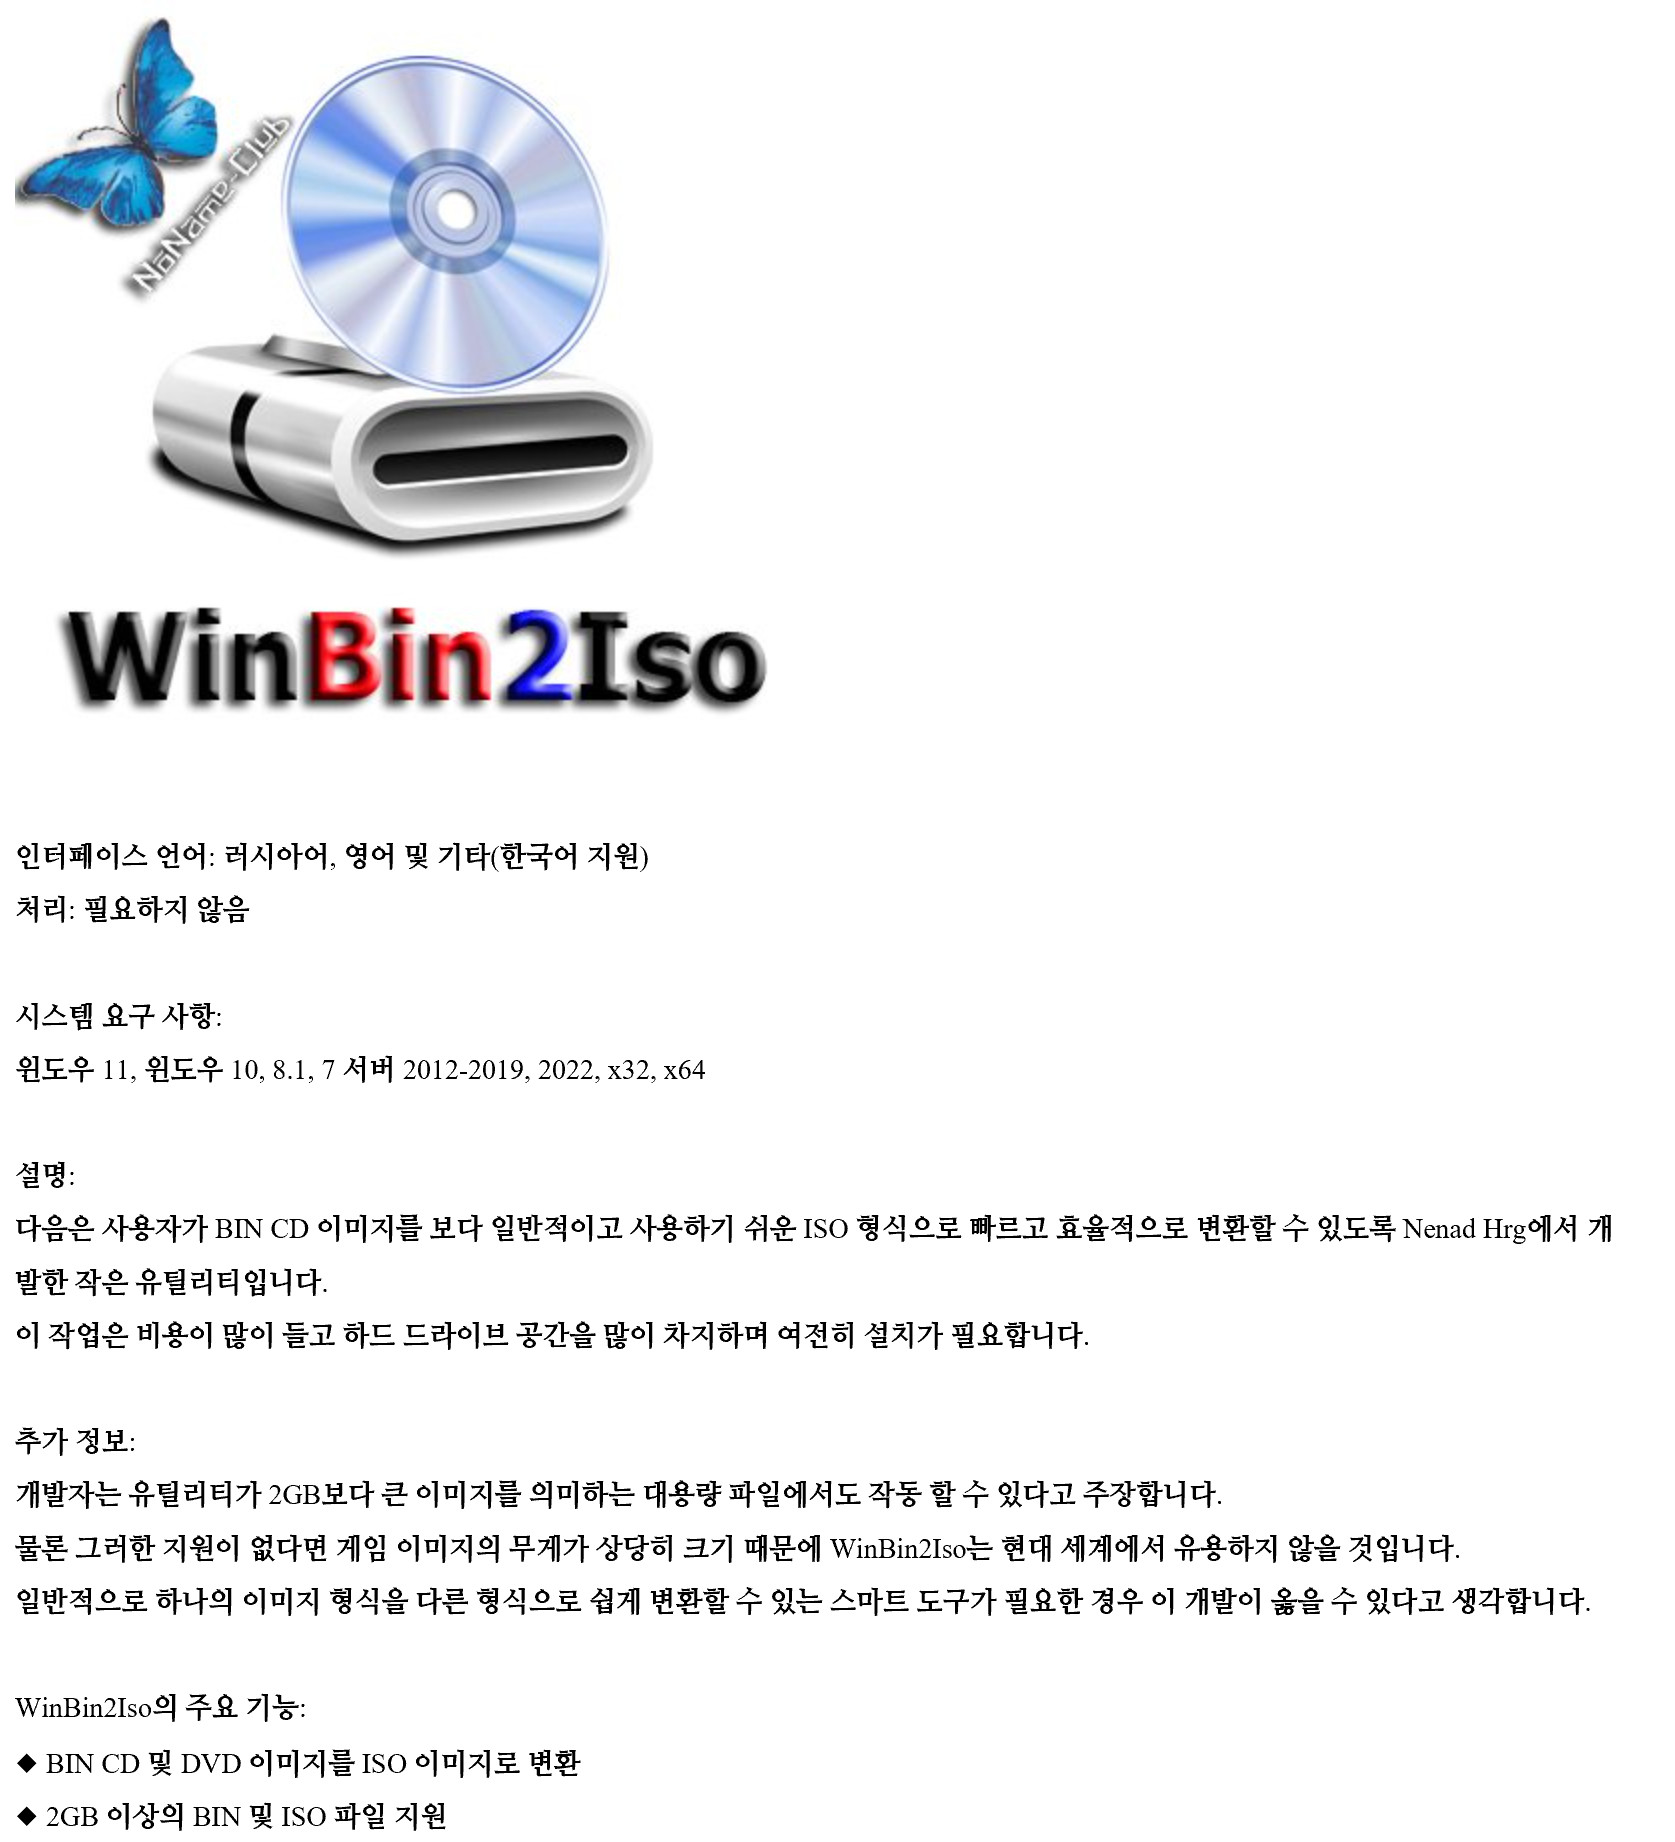 WinBin2Iso 6.21 instal the new version for windows